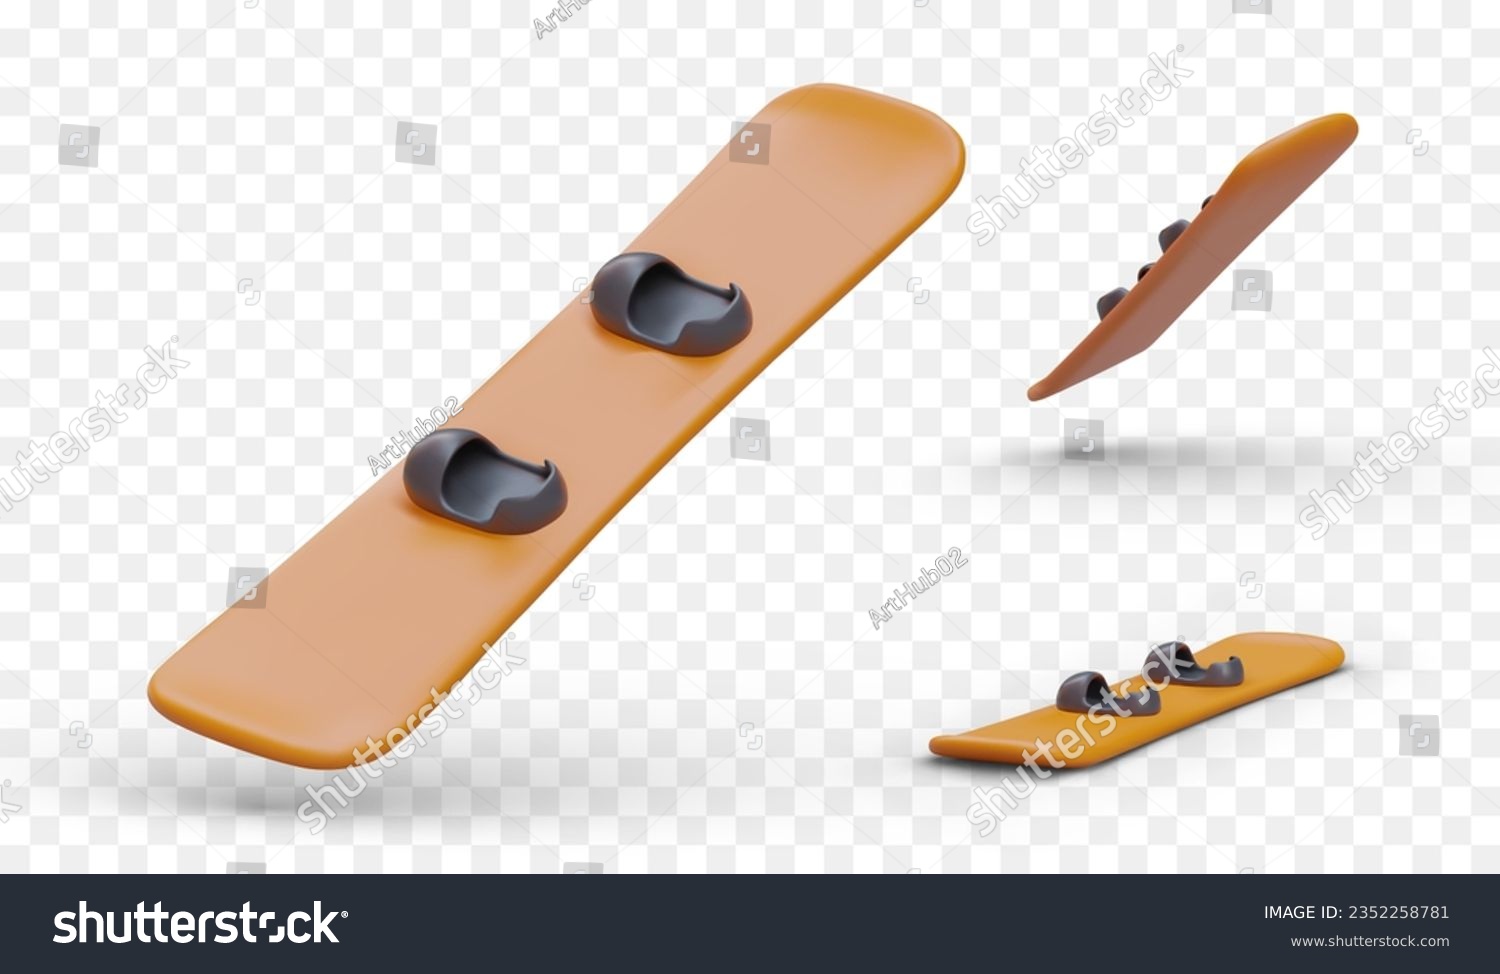 Set of realistic boards for snowboarding. Deck with binding foot pads. View from top, side, bottom. Color isolated vector illustration. Equipment for winter sports #2352258781